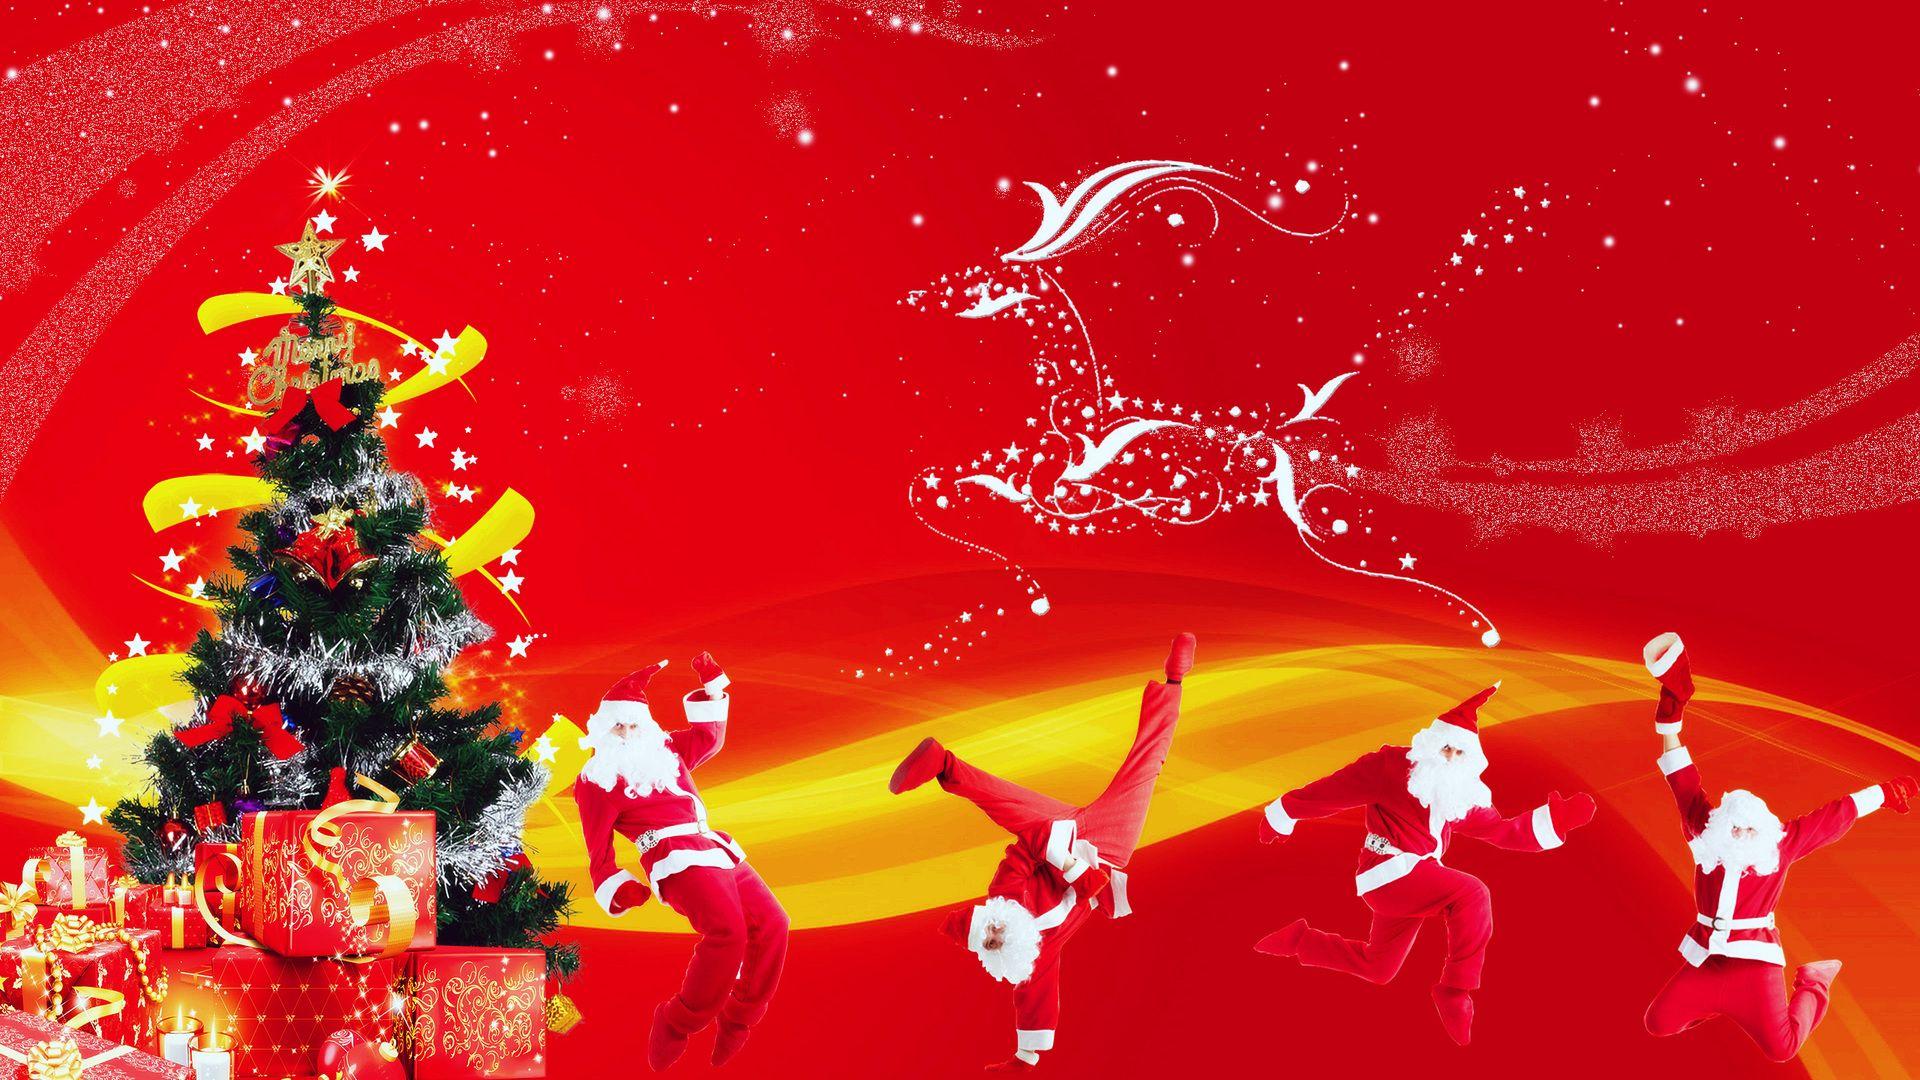 Have a jolly Christmas HD Wallpaper. Background Imagex1080